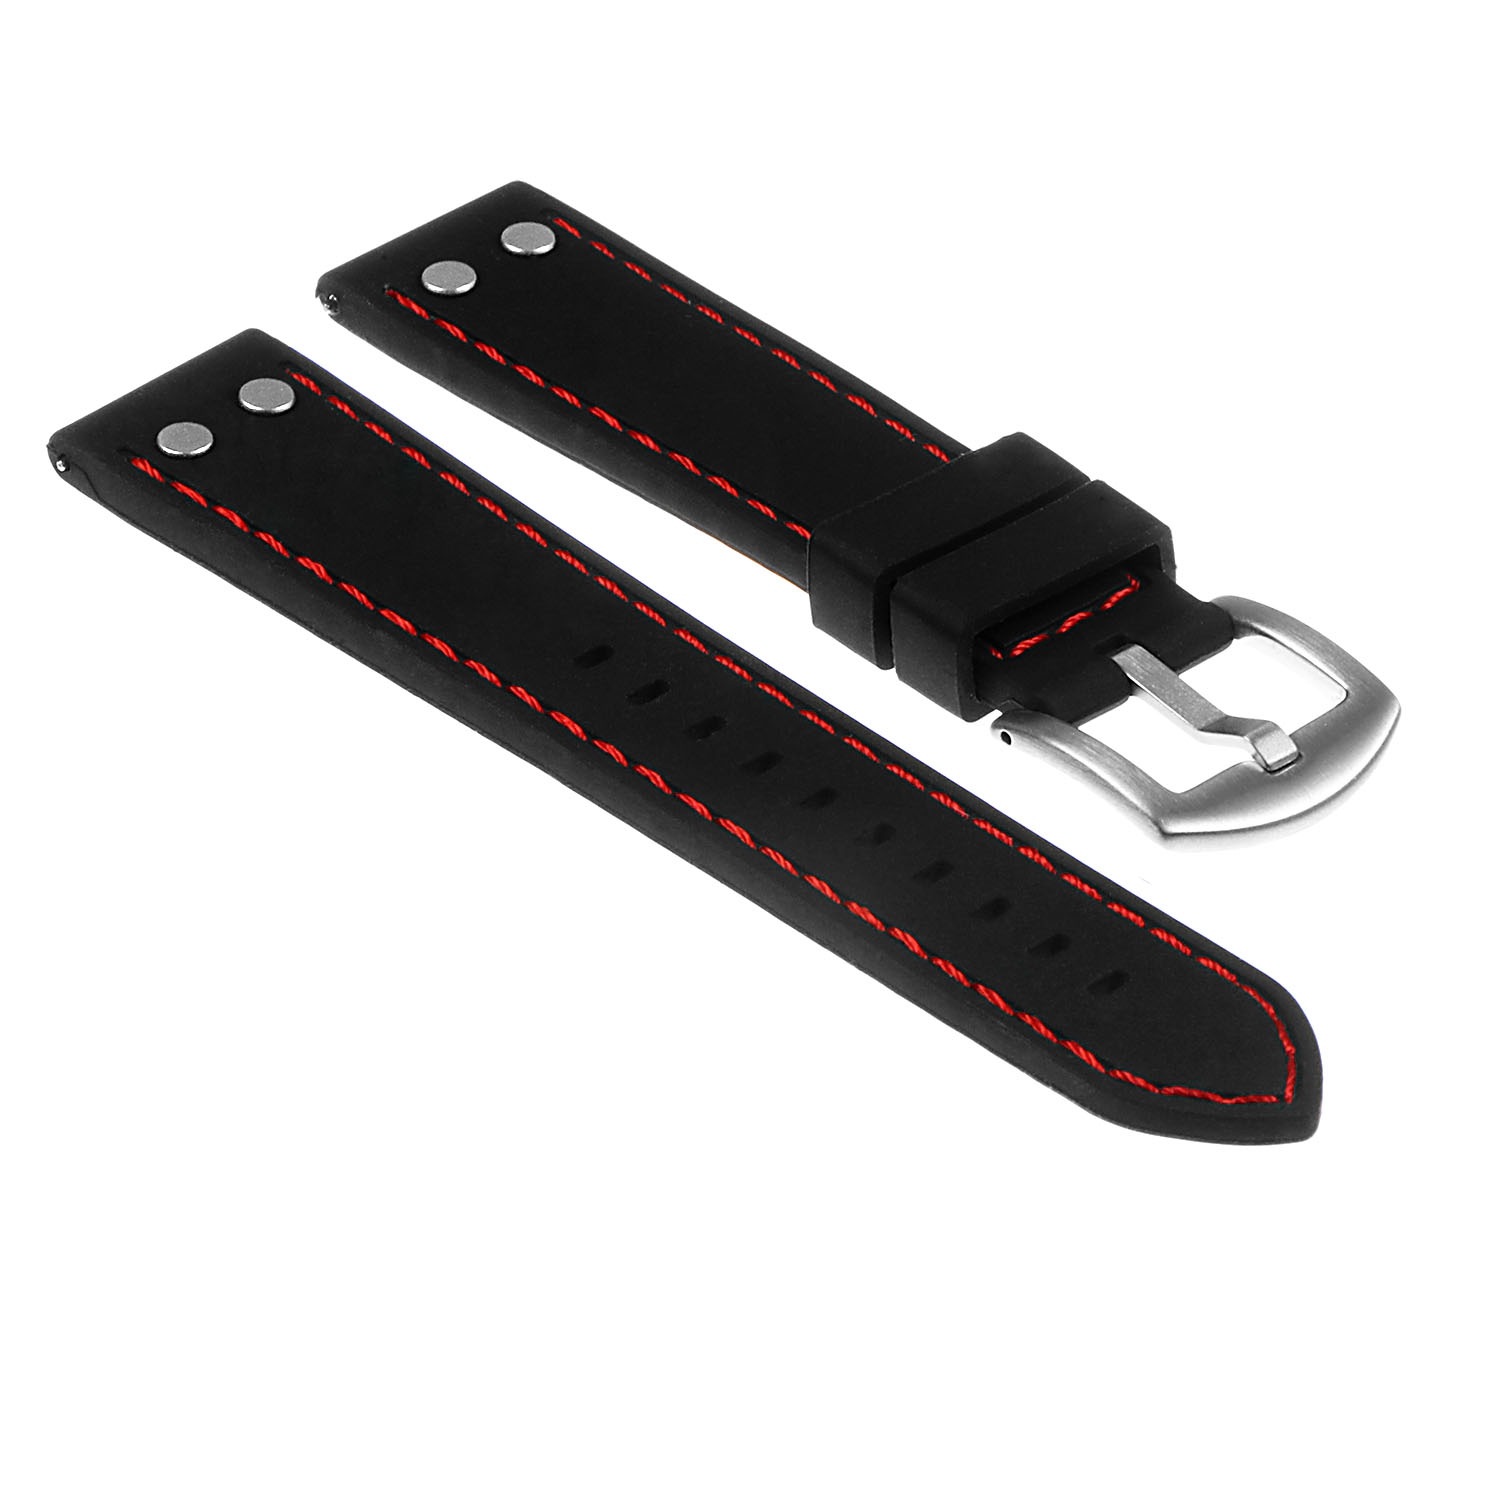 StrapsCo Silicone Rubber Aviator 22mm Watch Band Strap for LG G Watch W100 - Black & Red